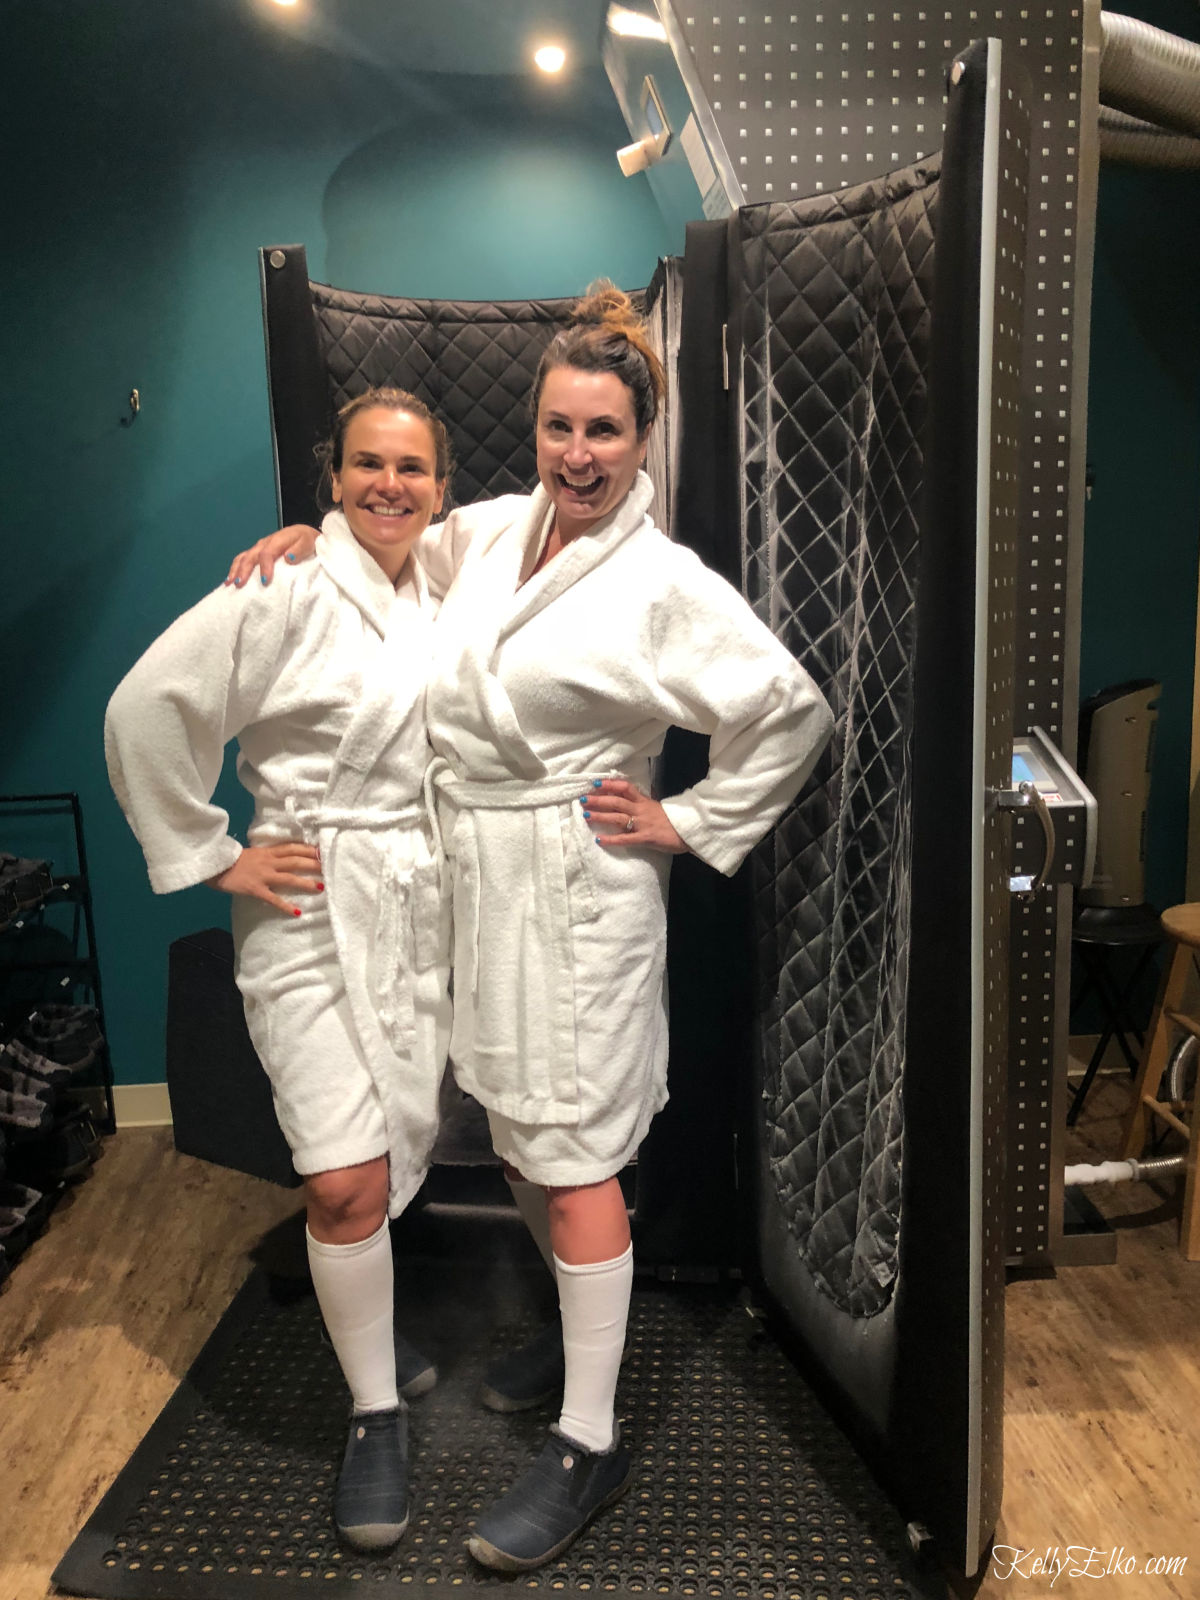 52 Weeks of Yes! Join Kelly in the cryotherapy chamber to see if she can handle the cold! kellyelko.com #52weeksofyes #cryotherapy #selfcare